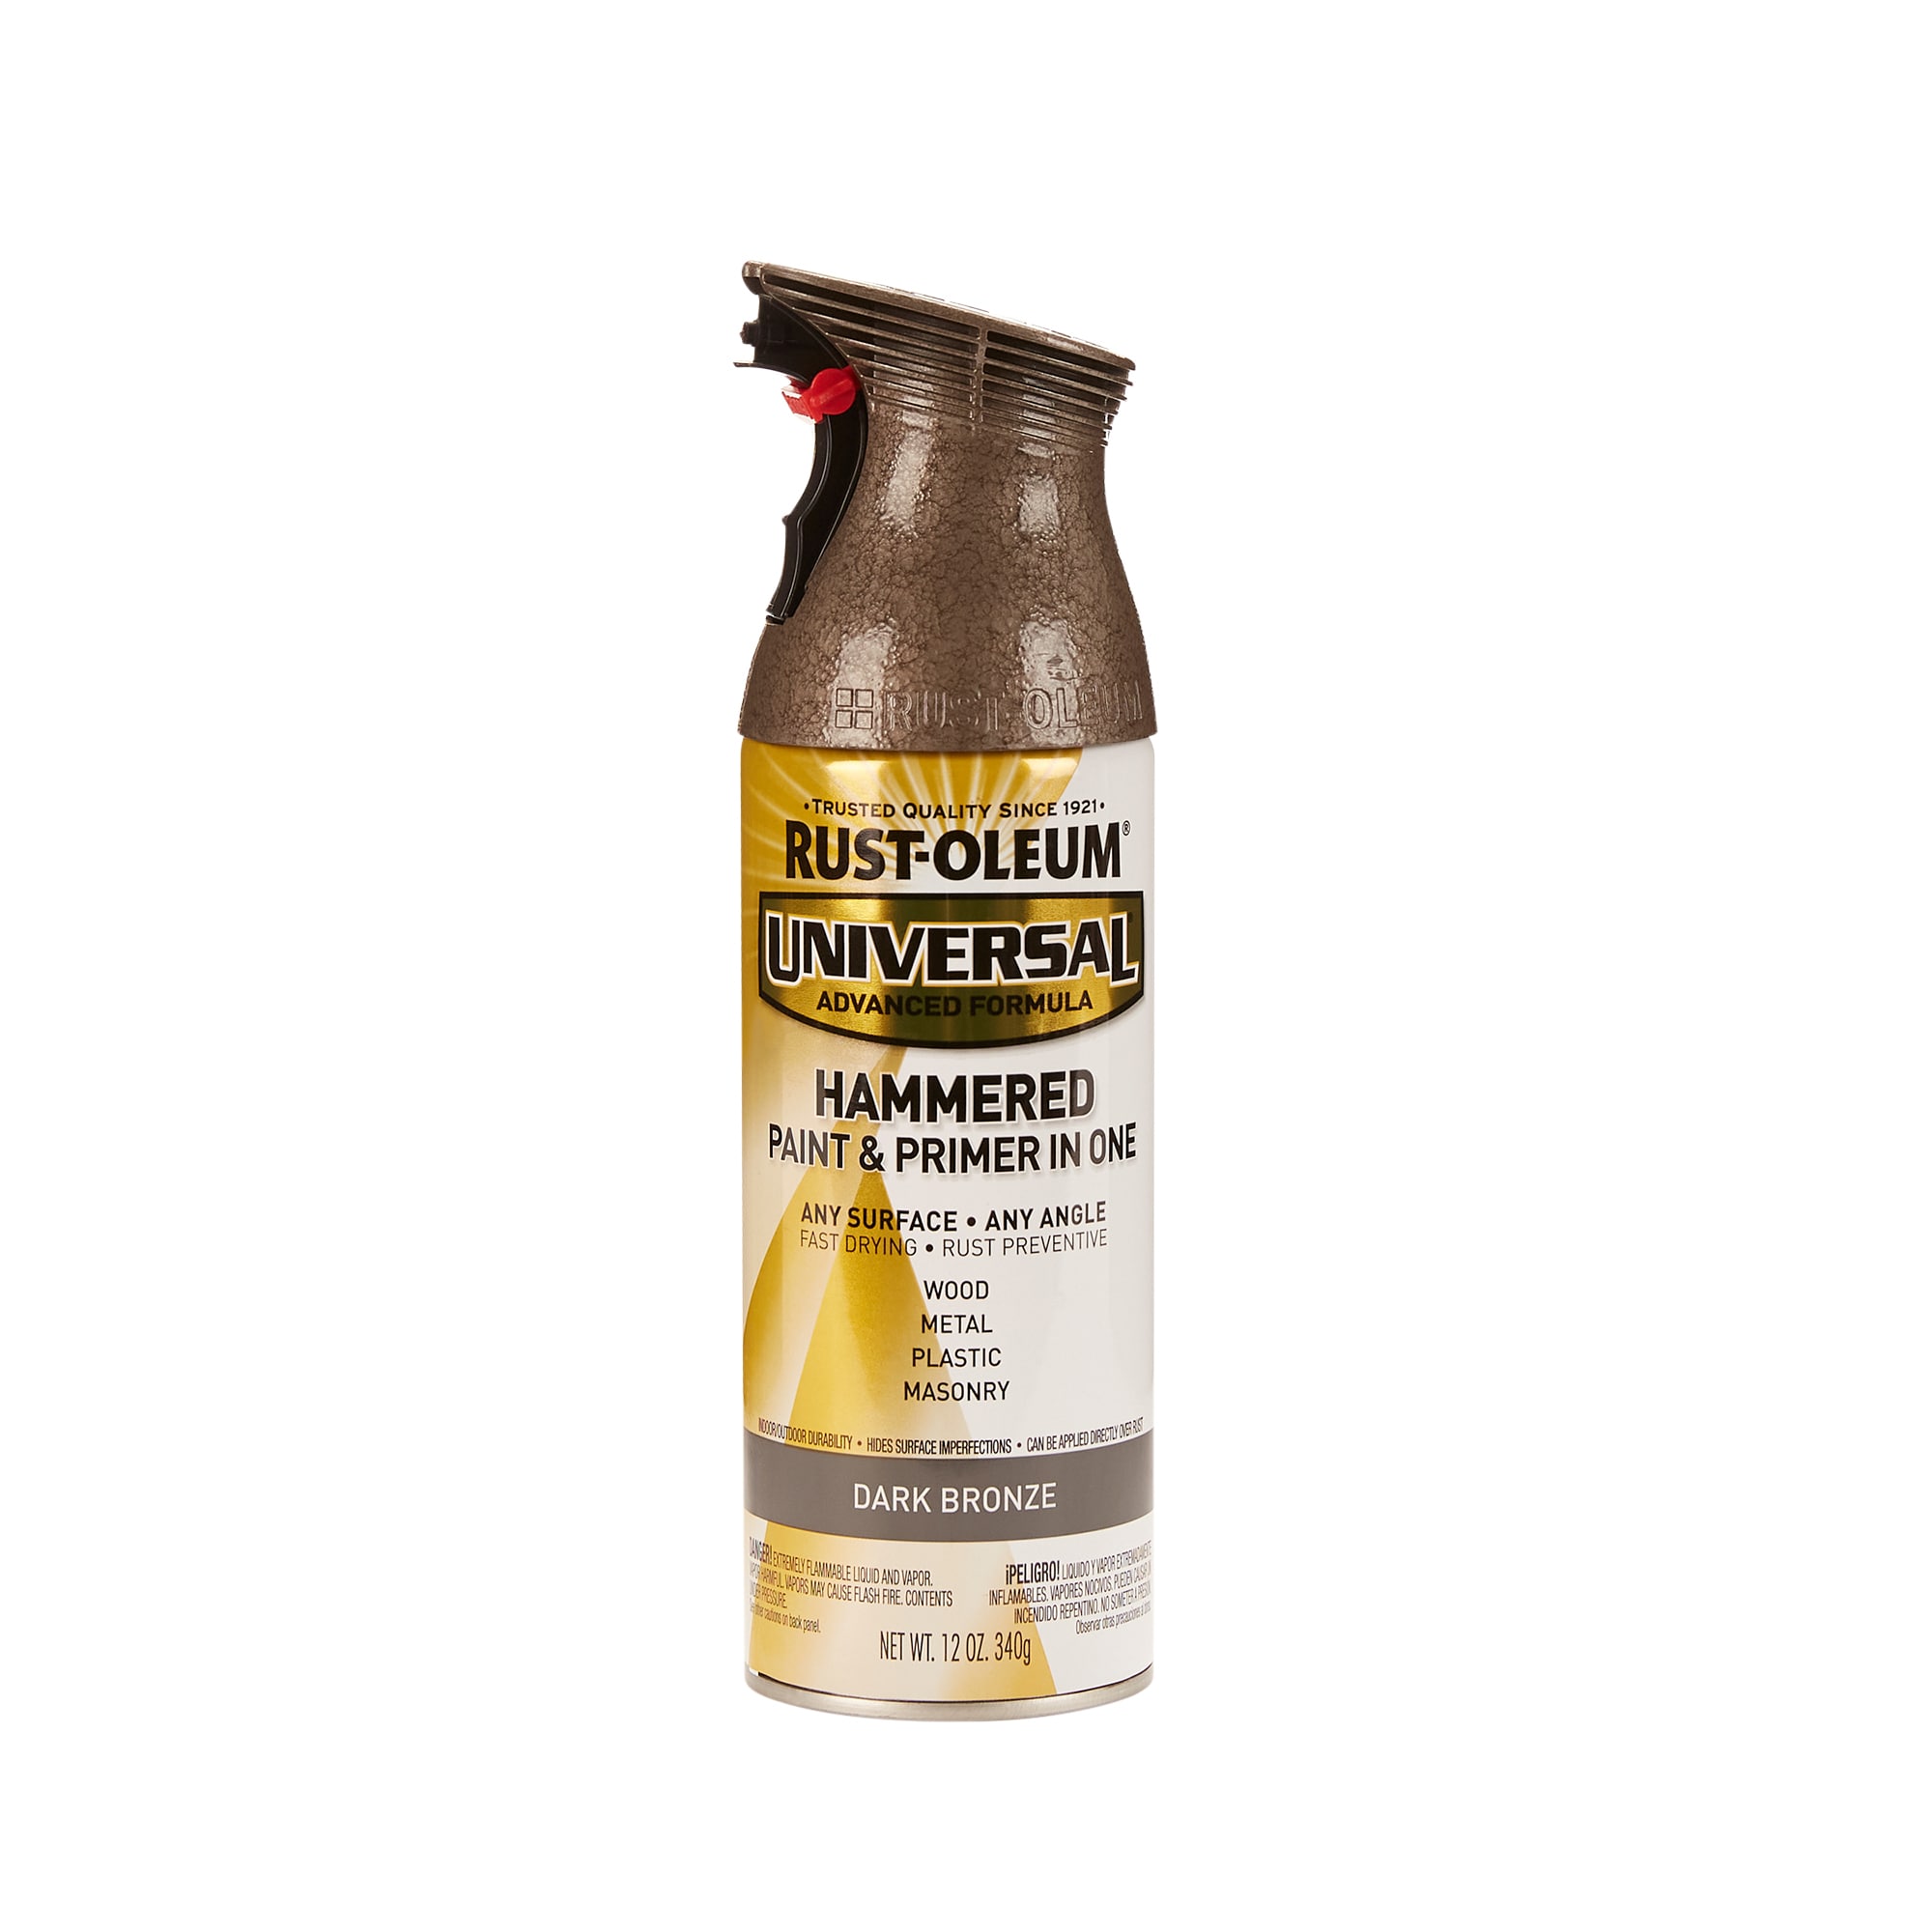 Rust-Oleum Universal Gloss Dark Hammered Spray Paint and Primer In One (NET WT. 12-oz) in the Spray department at Lowes.com